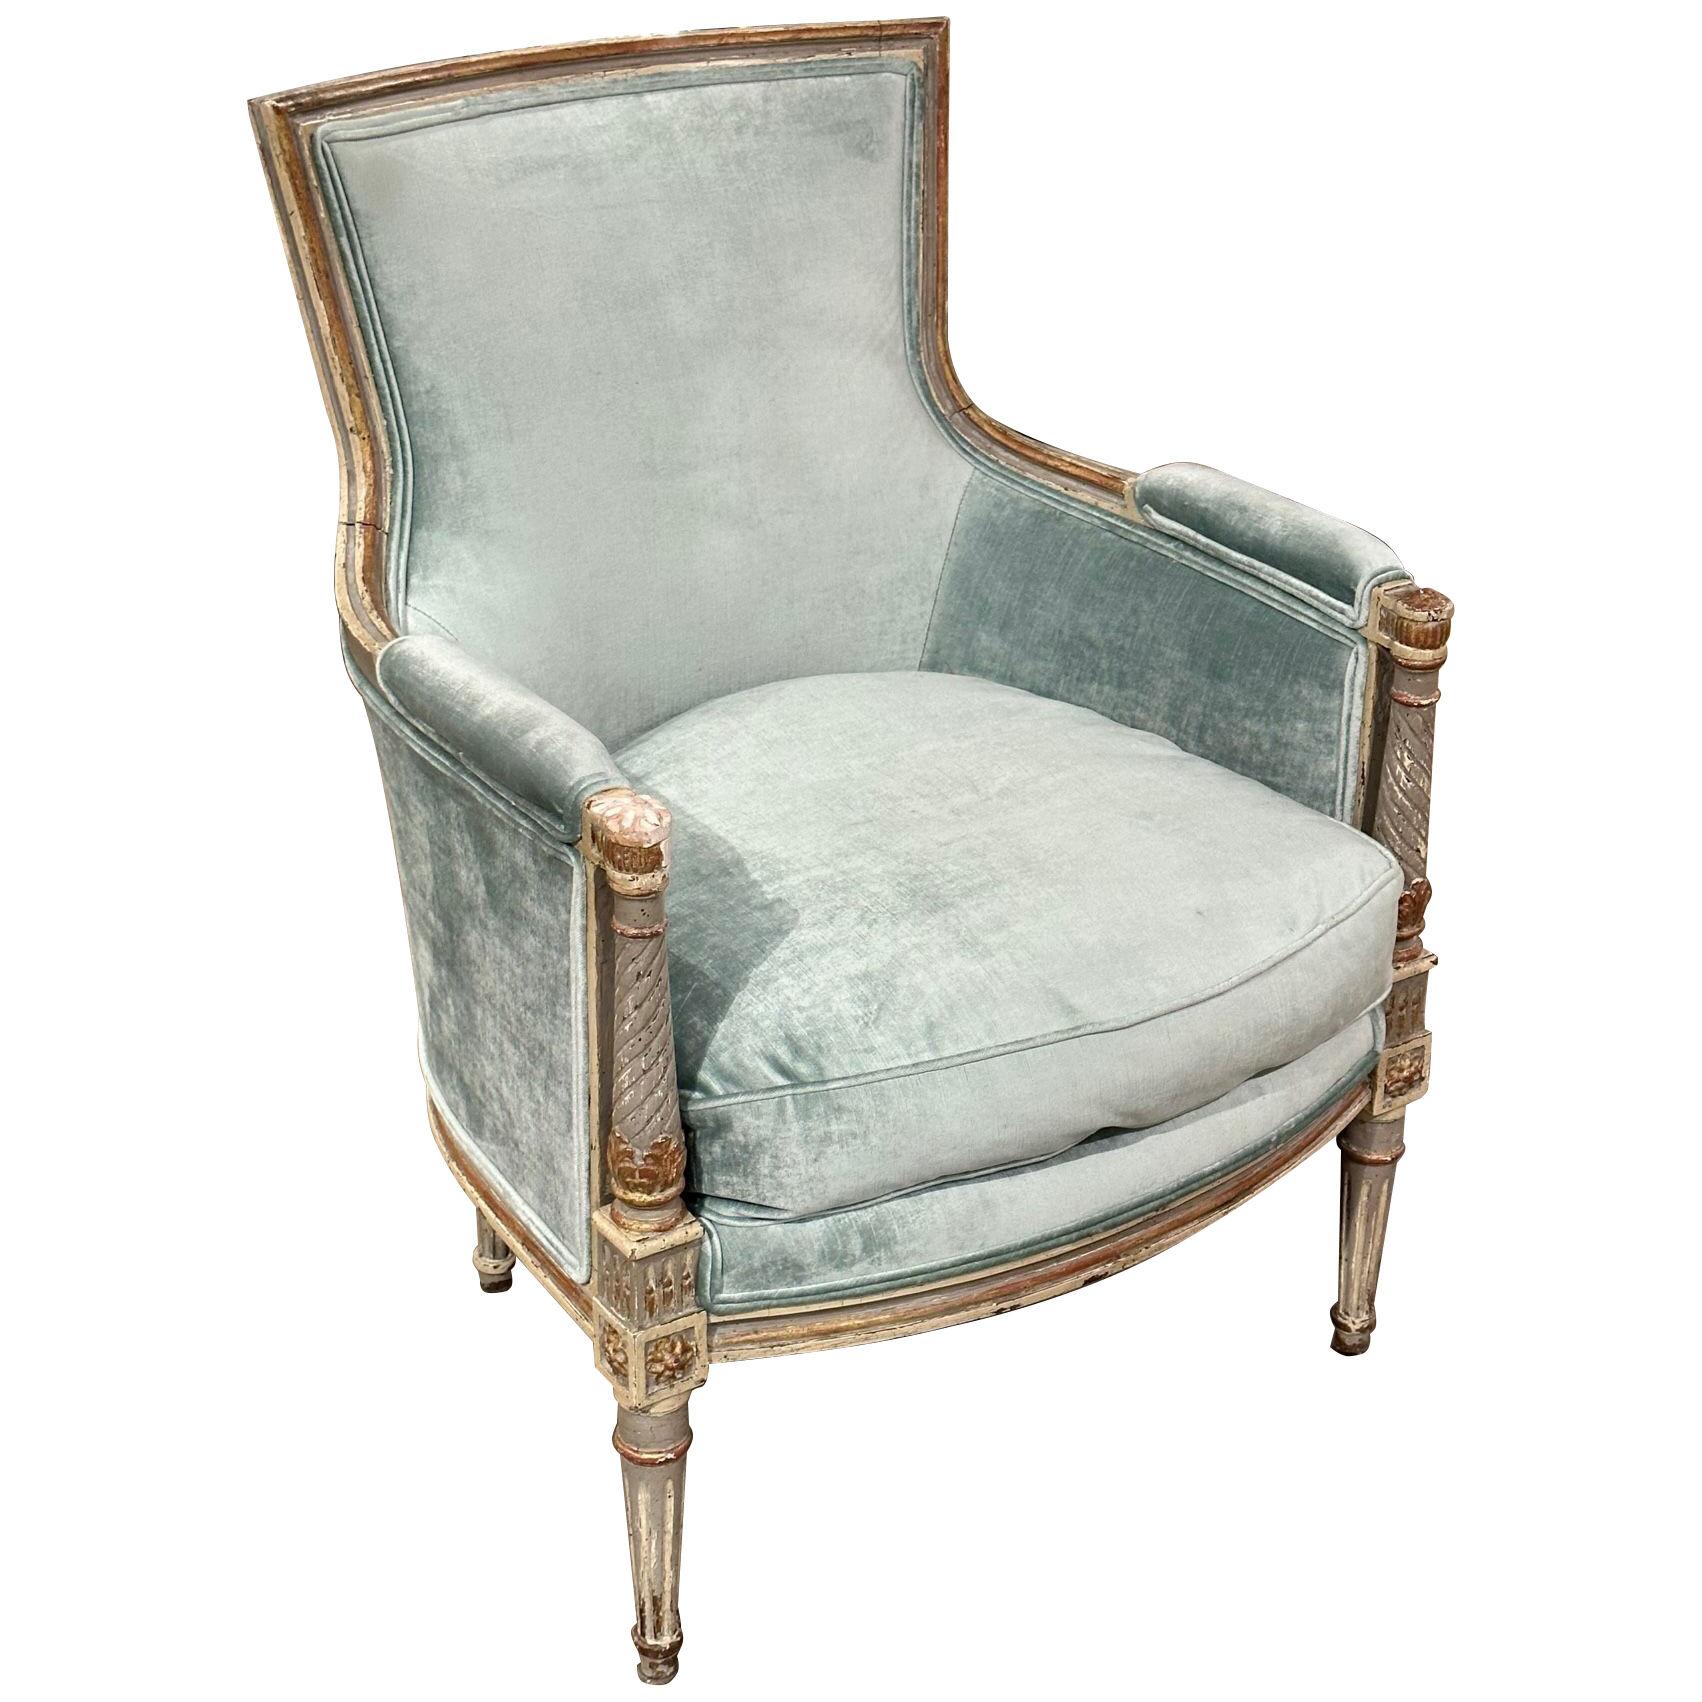 French Directoire' Armchair